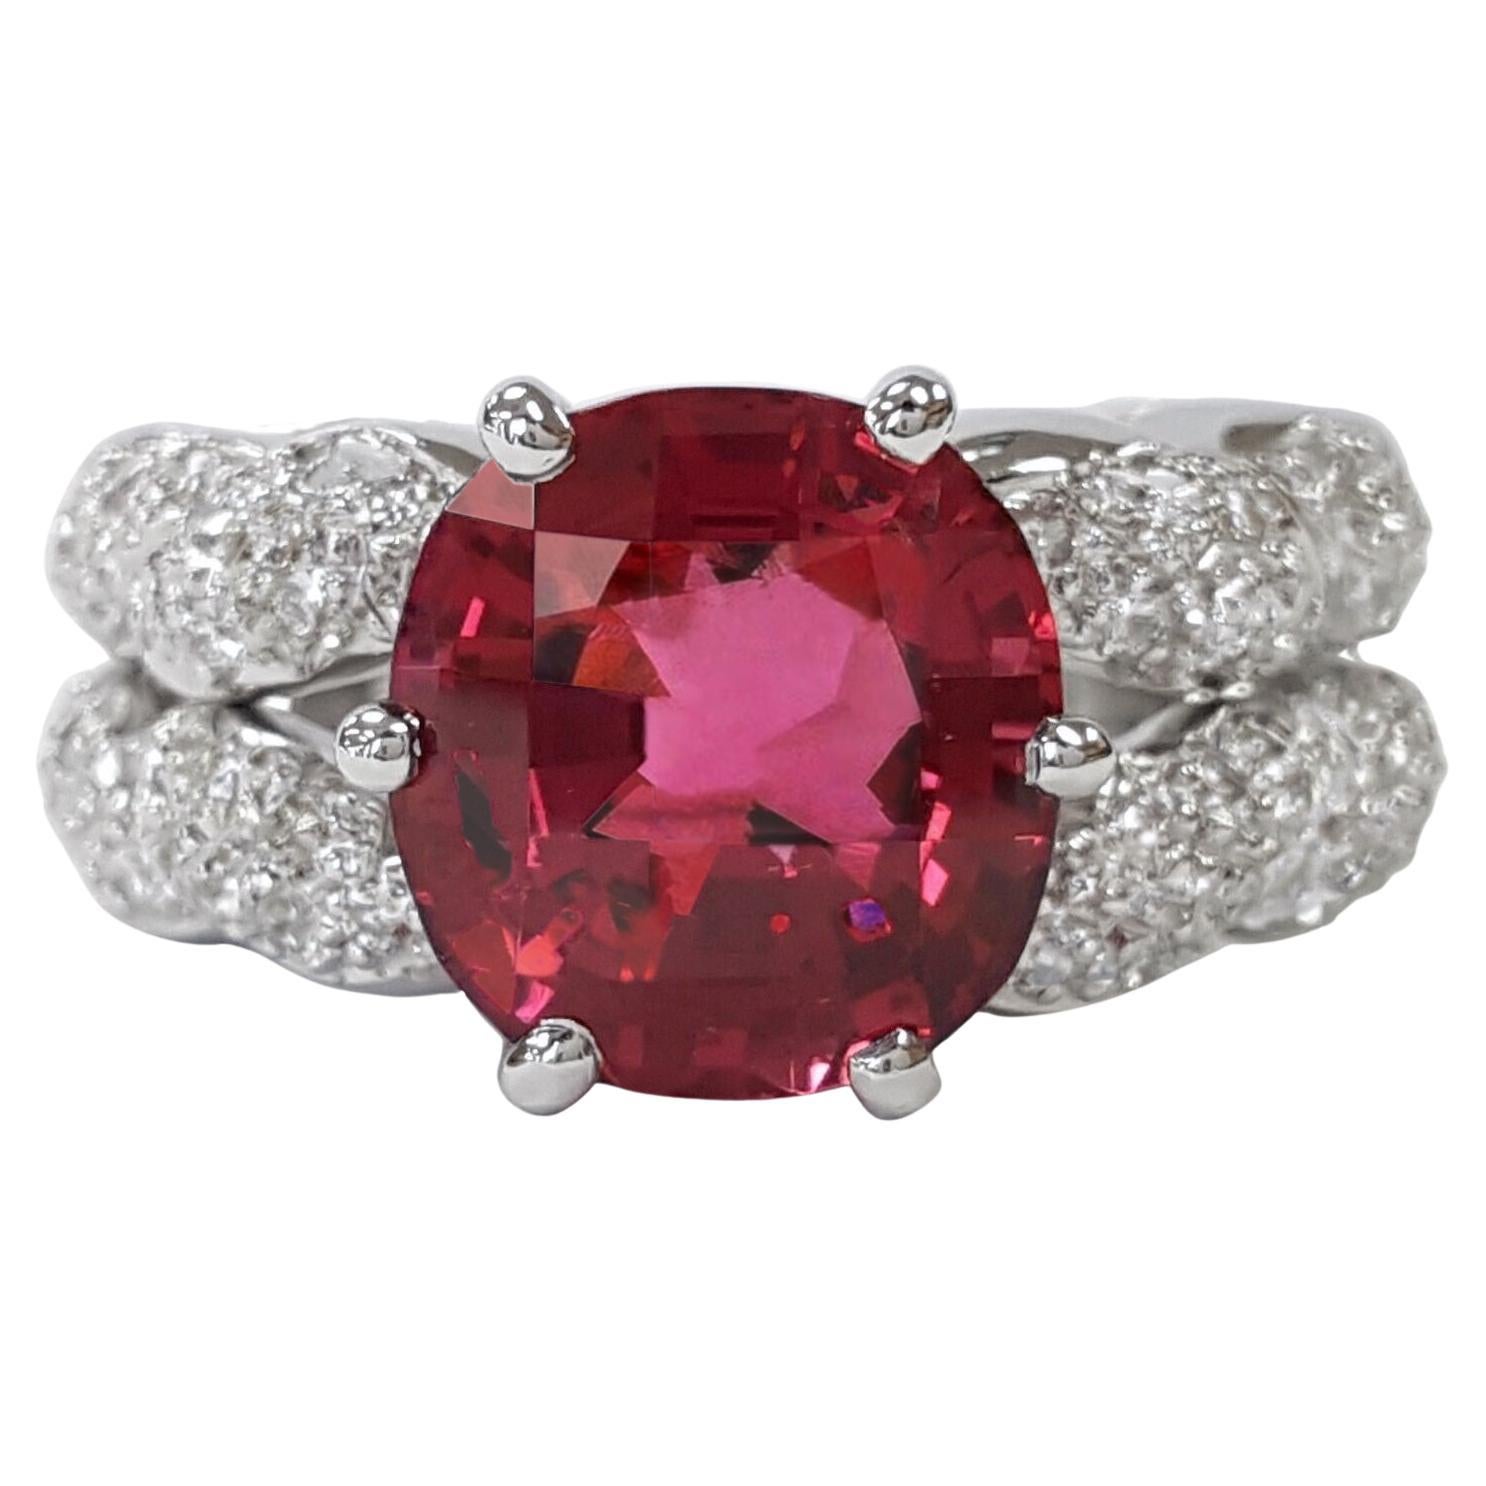 GIA Certified Cushion Red Spinel Diamond Platinum Ring For Sale